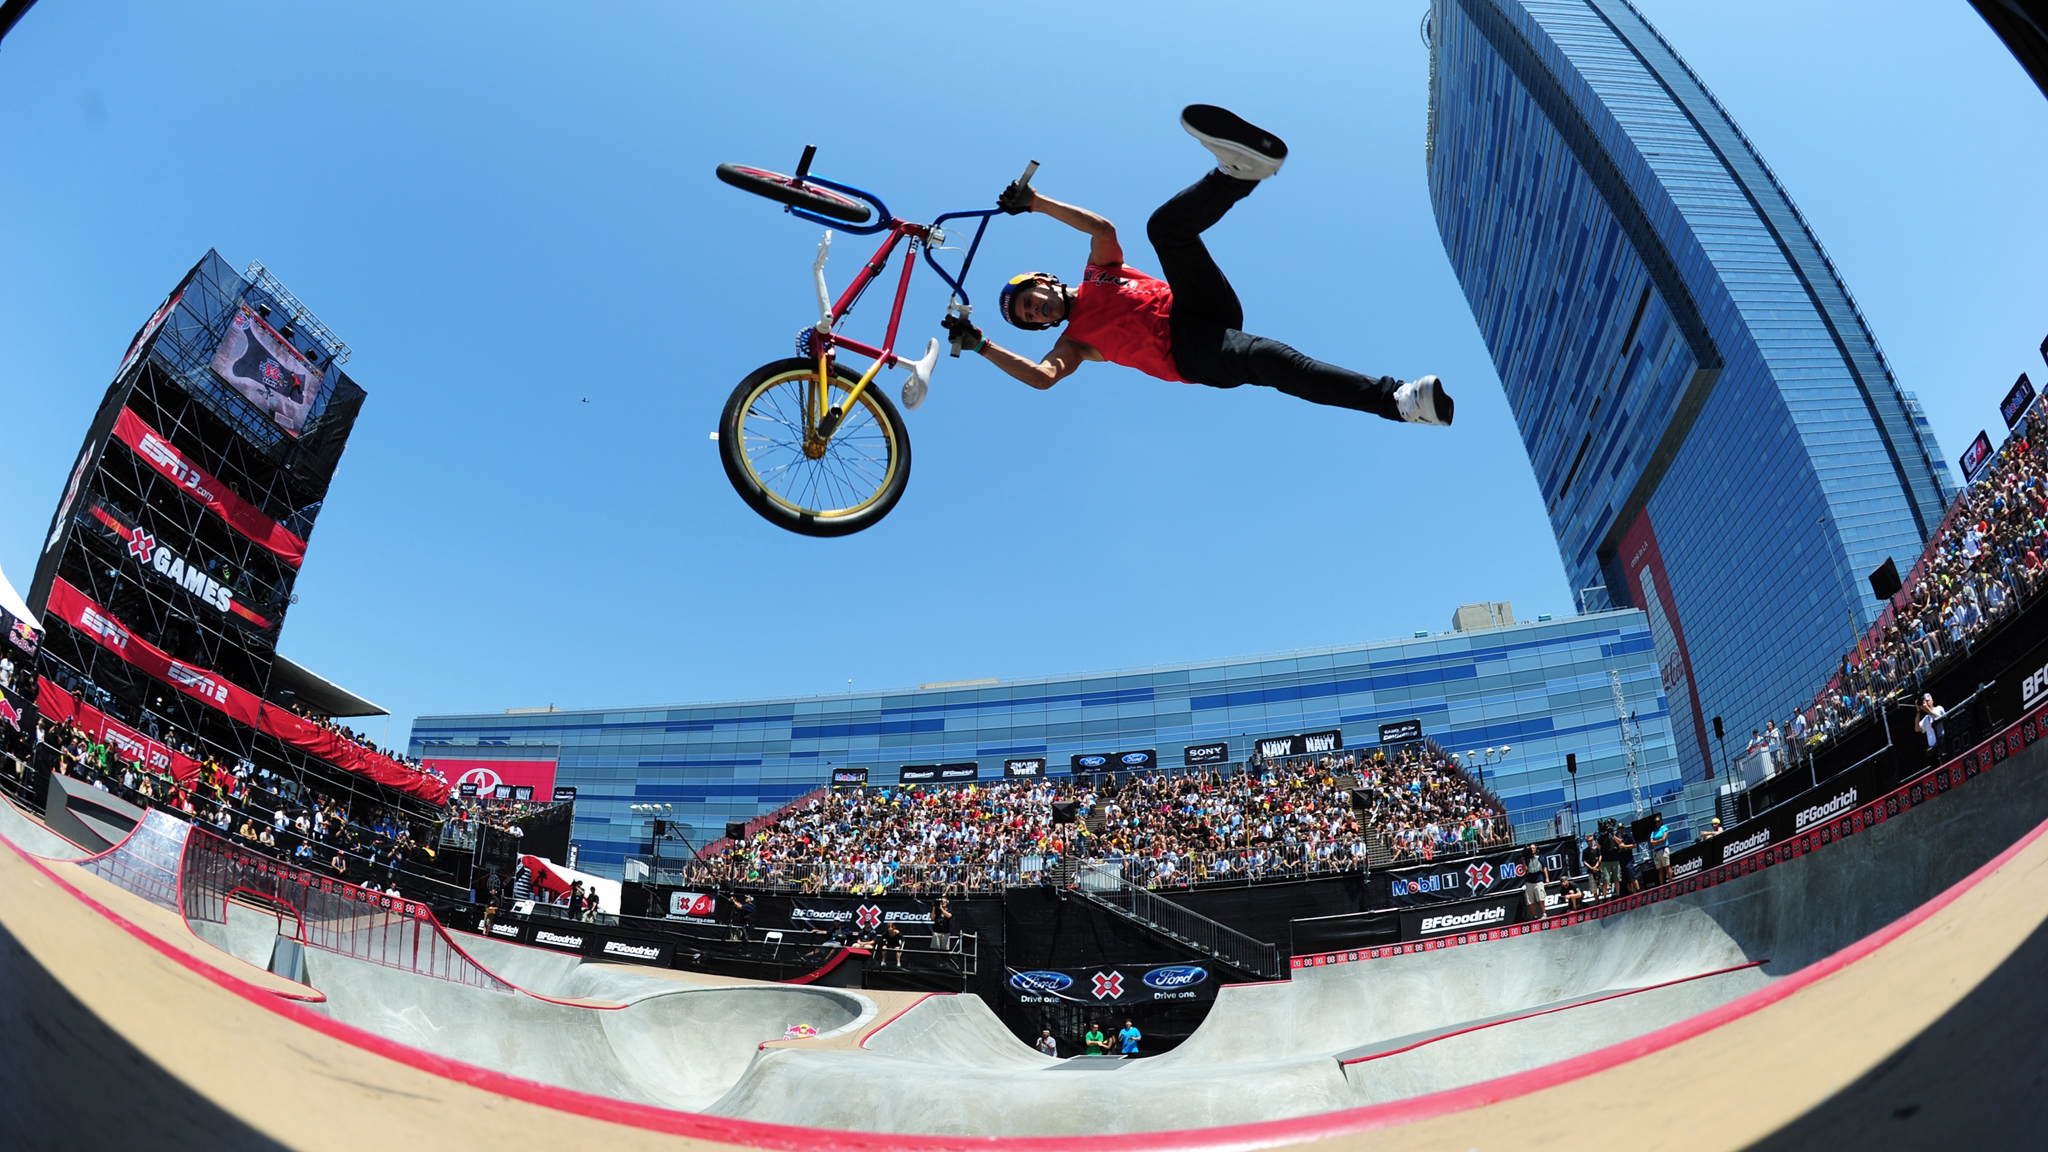 Four-time X Games gold medalist Daniel Dhers is part of a contingent of BMX